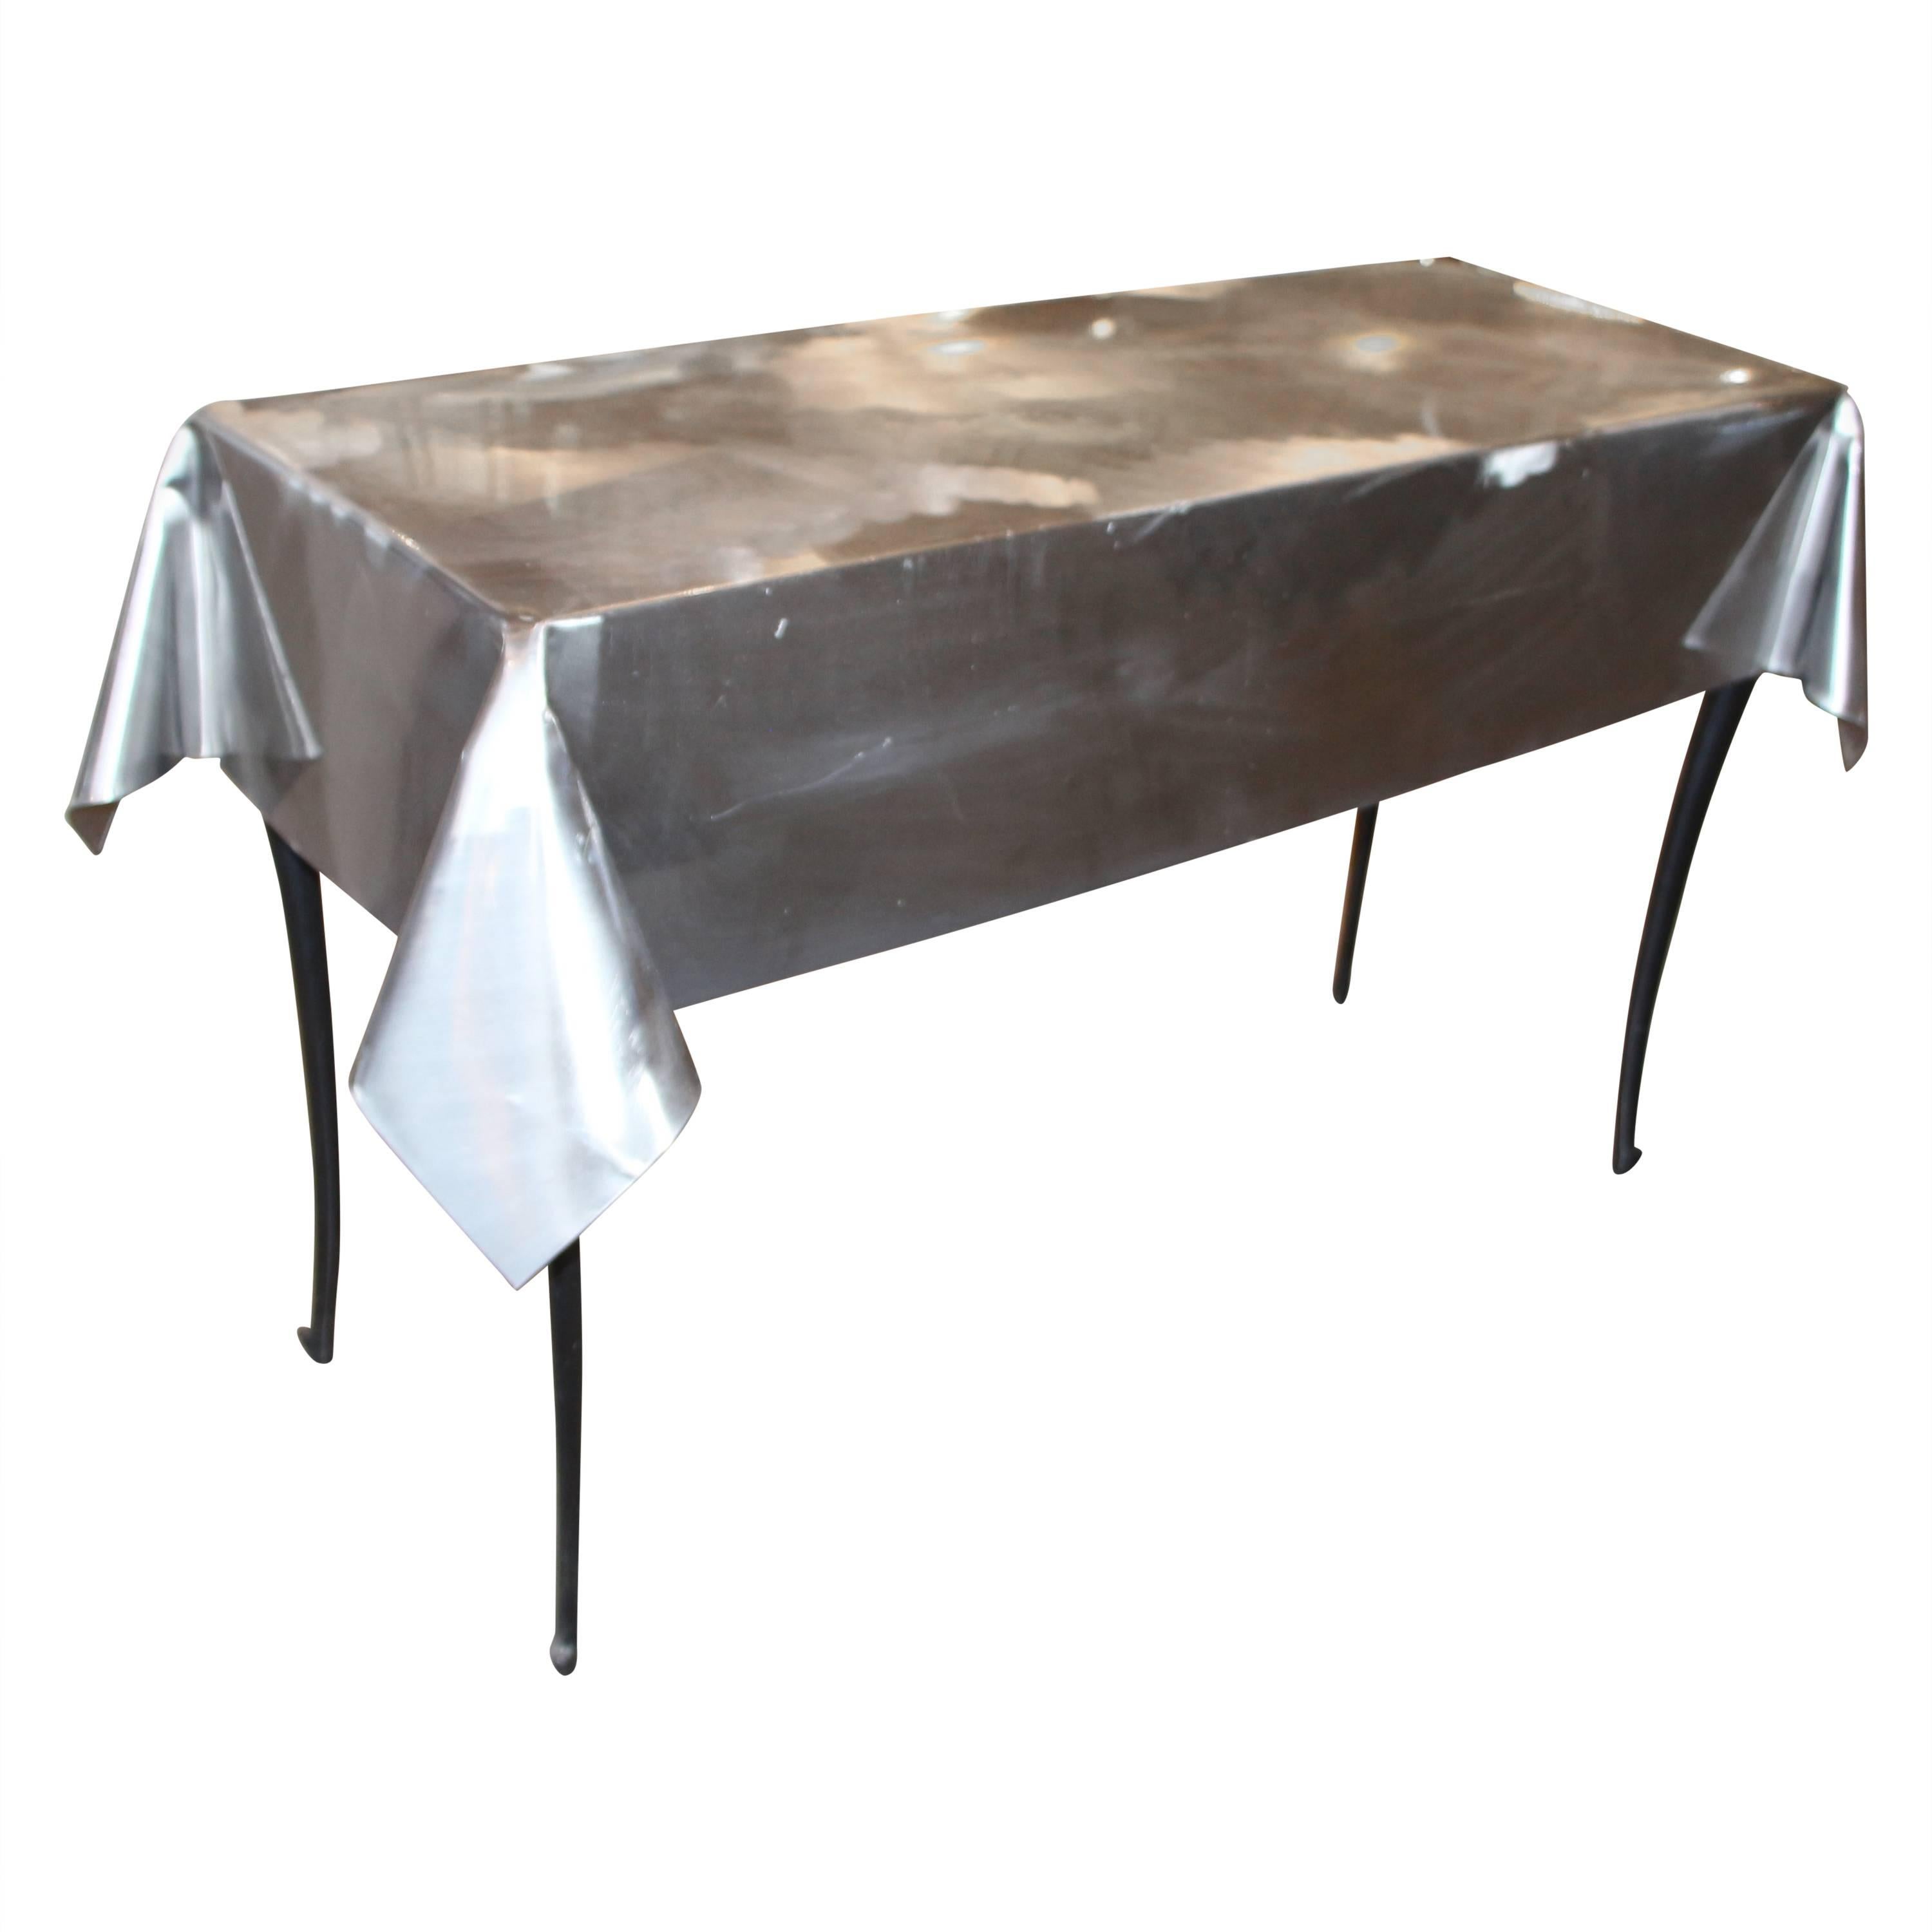 Metal Draped Console Table with Legs